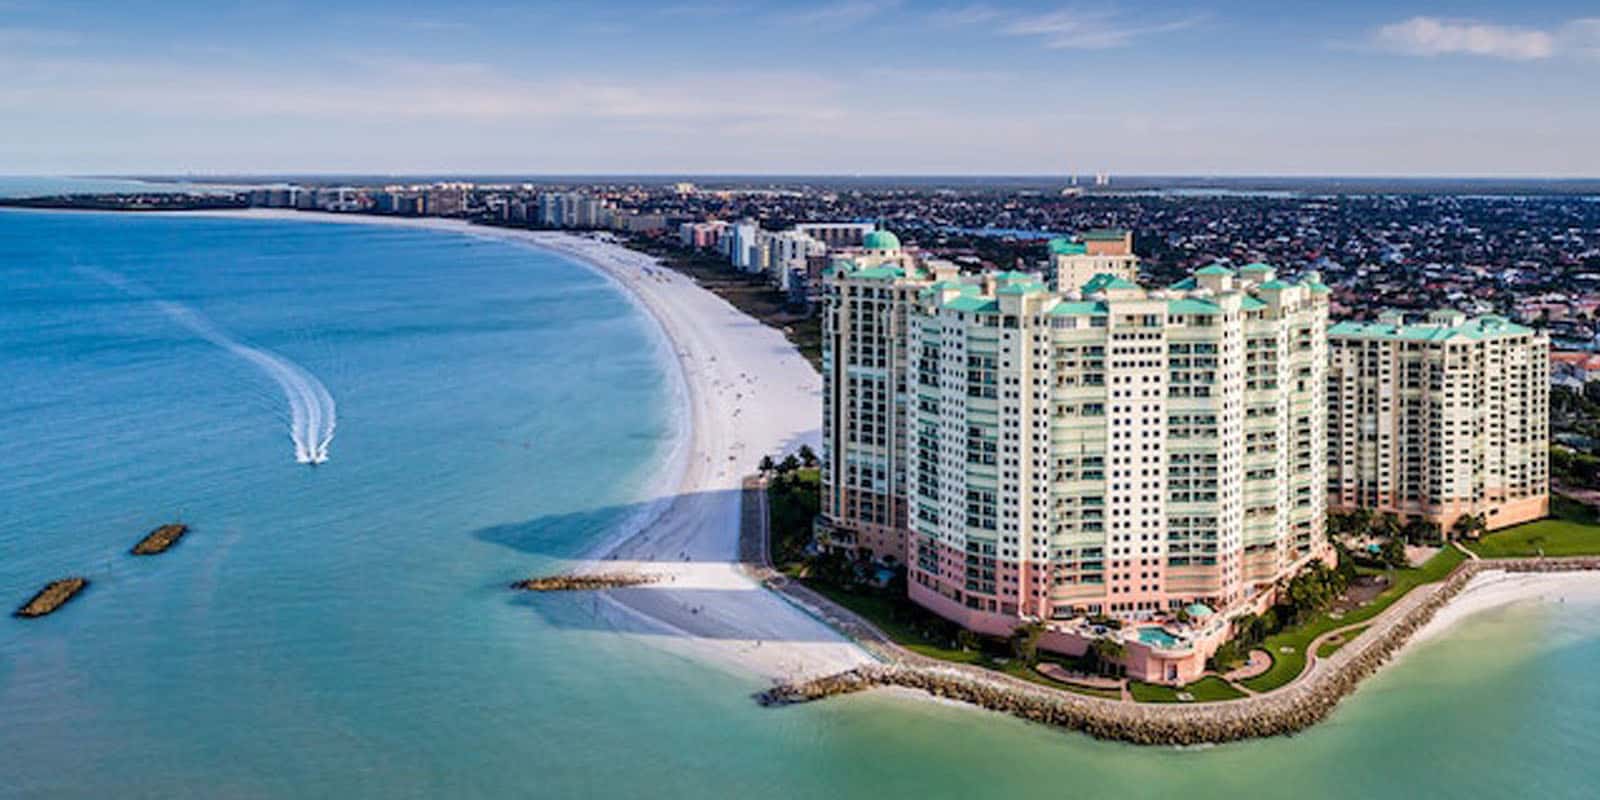 Marco Island real estate prices